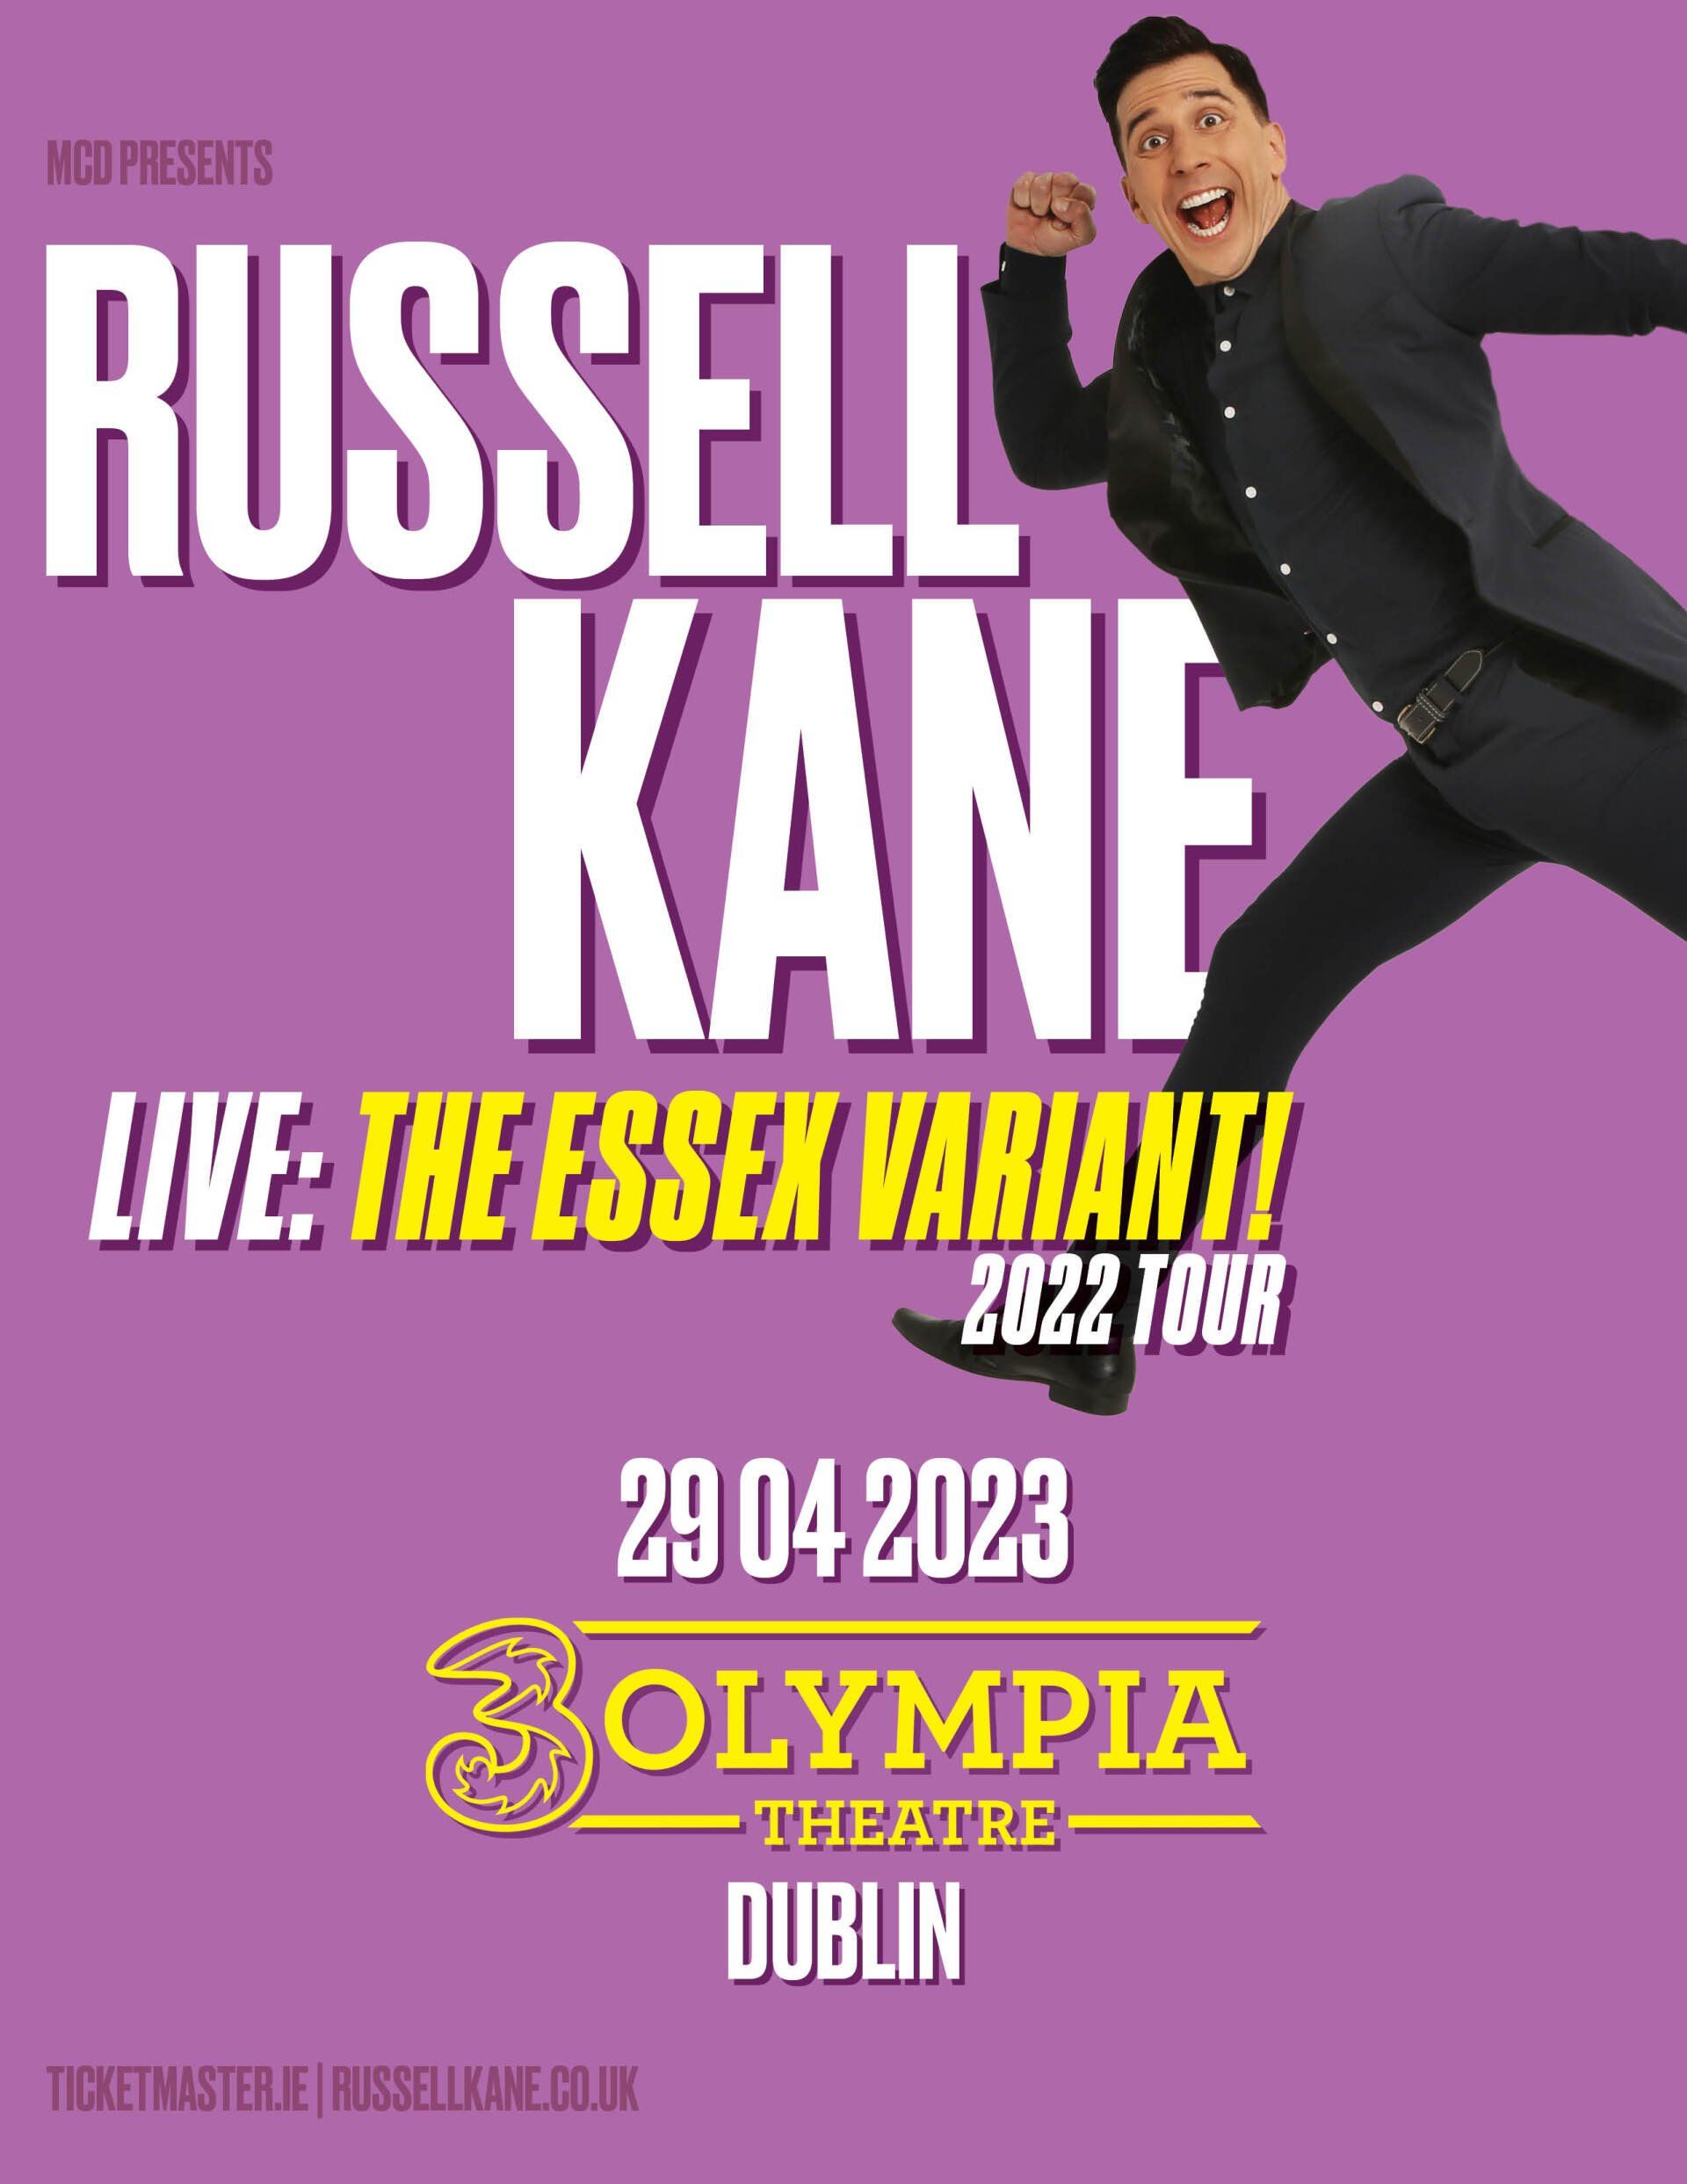 Russell Kane Live The Essex Variant! 3OLYMPIA THEATRE